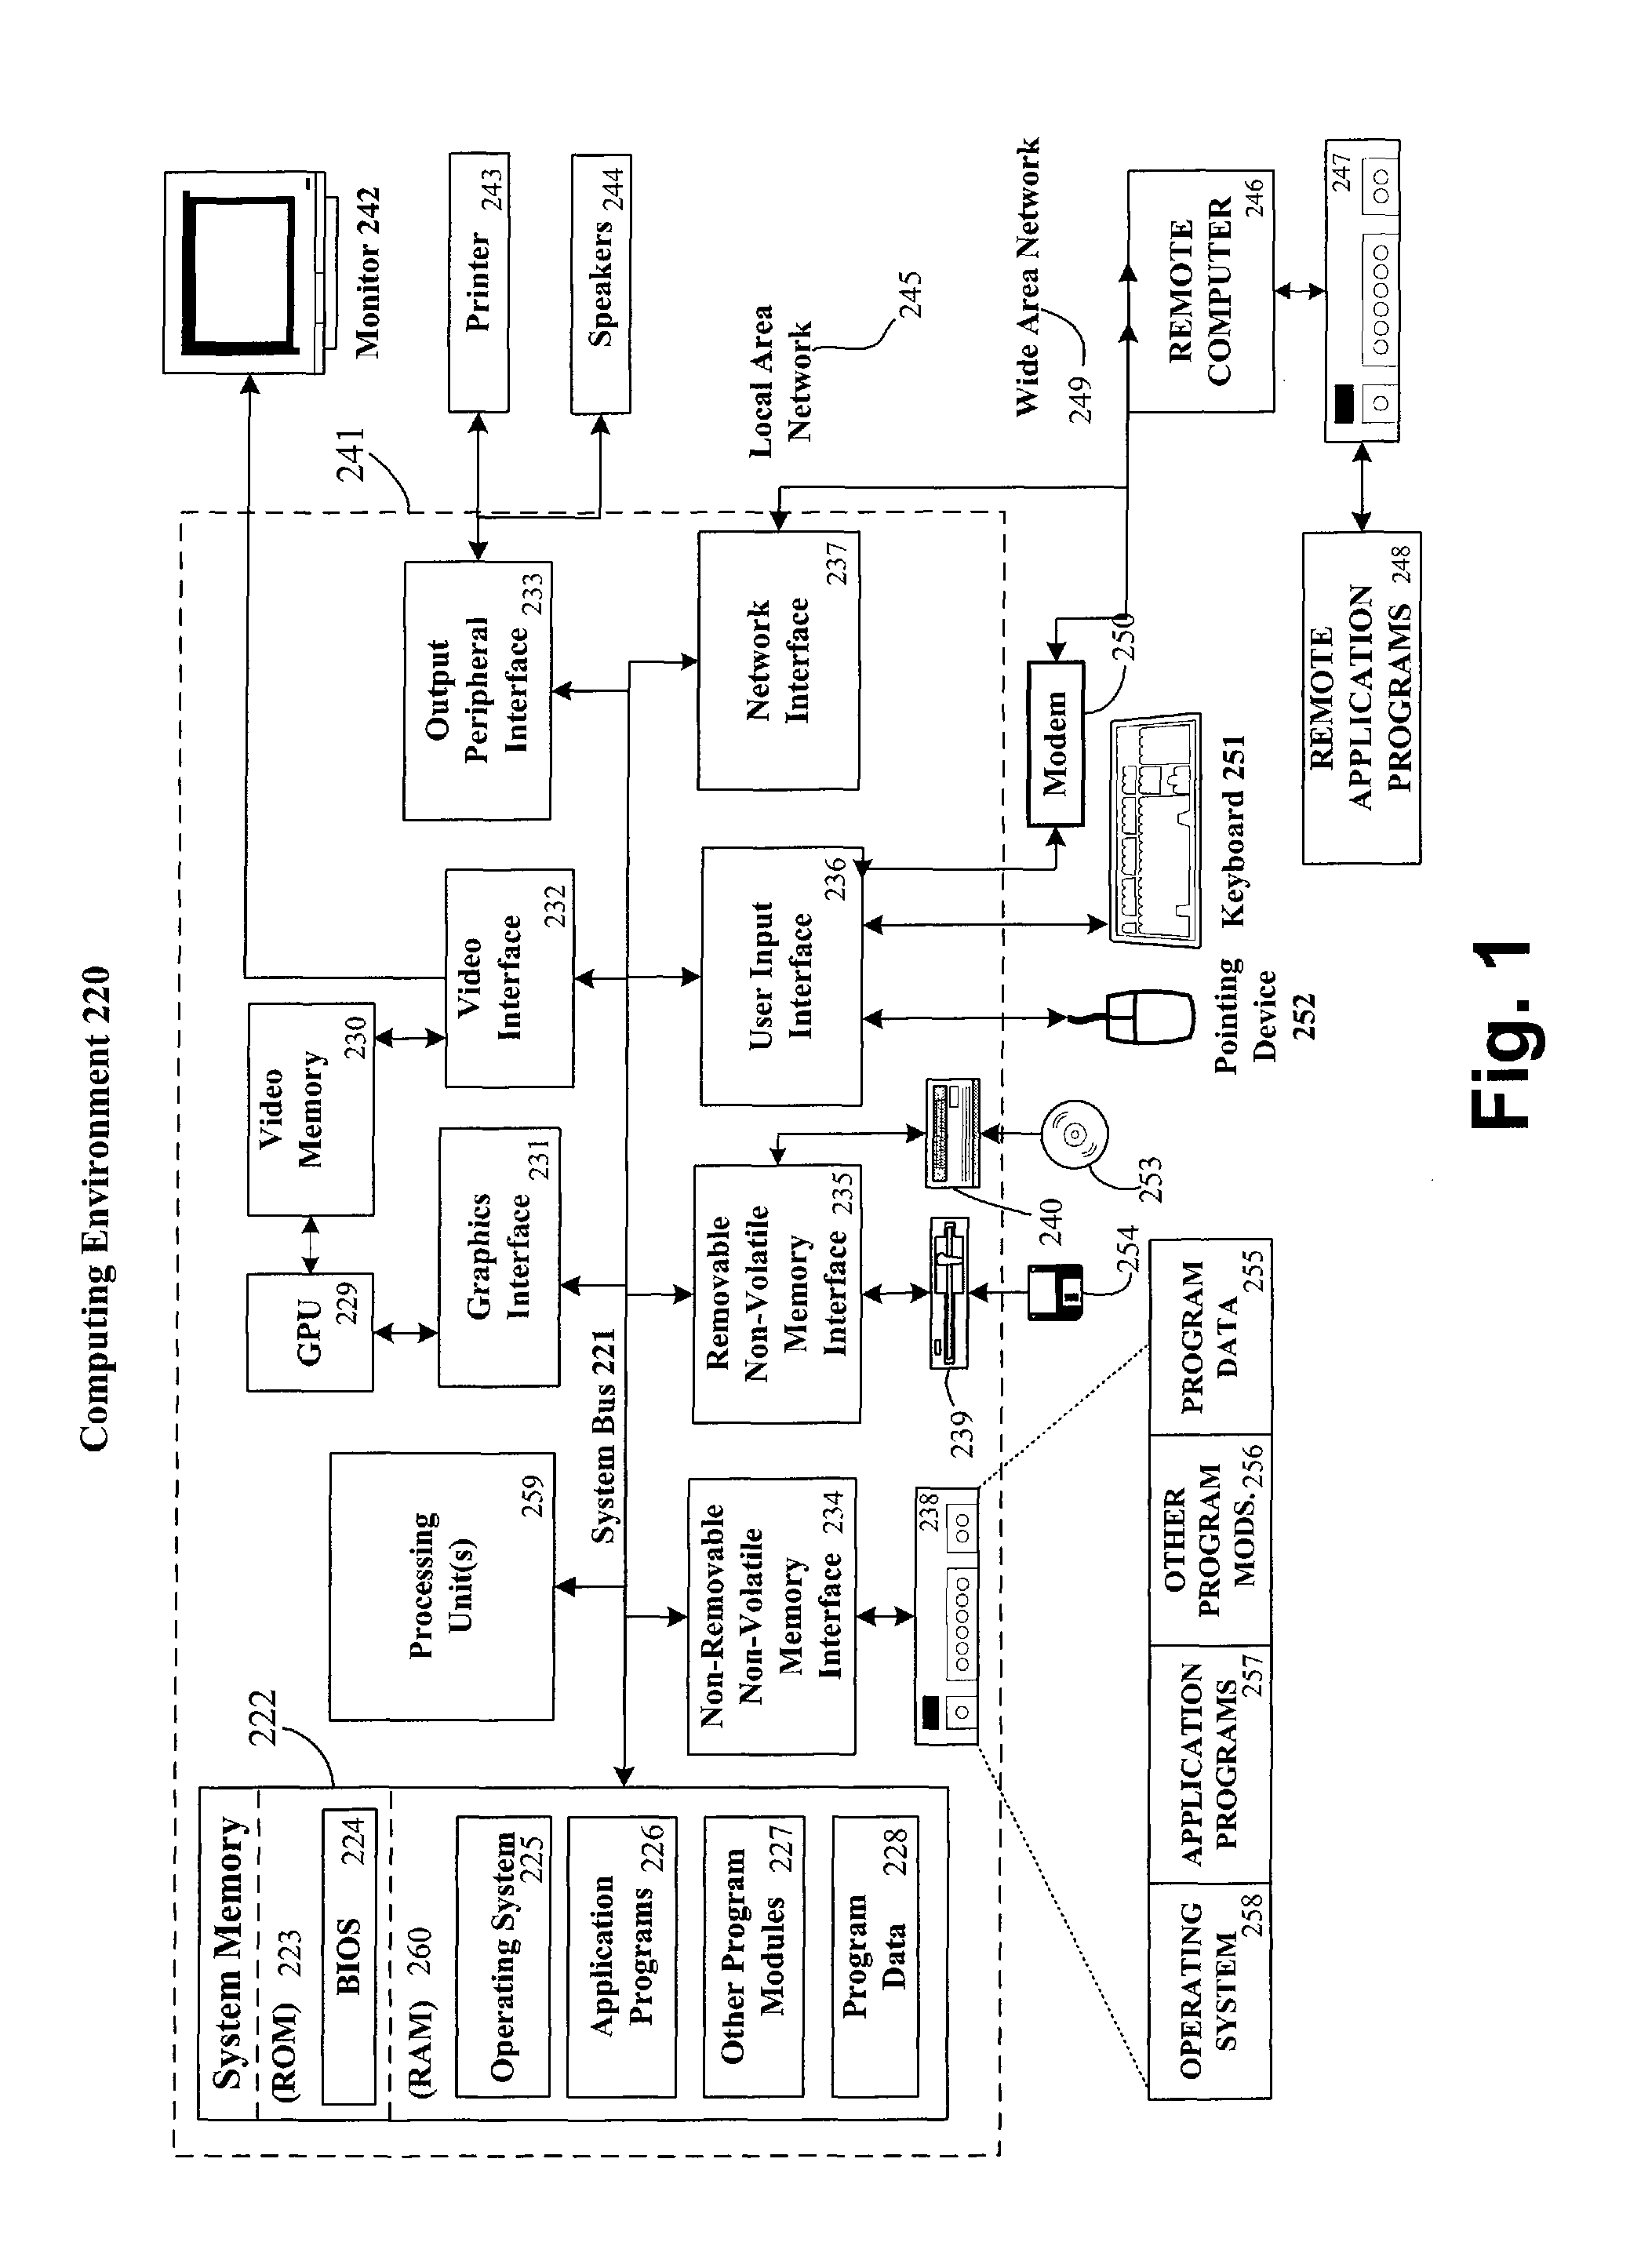 Systems and methods of automating reconsideration of cardiac risk